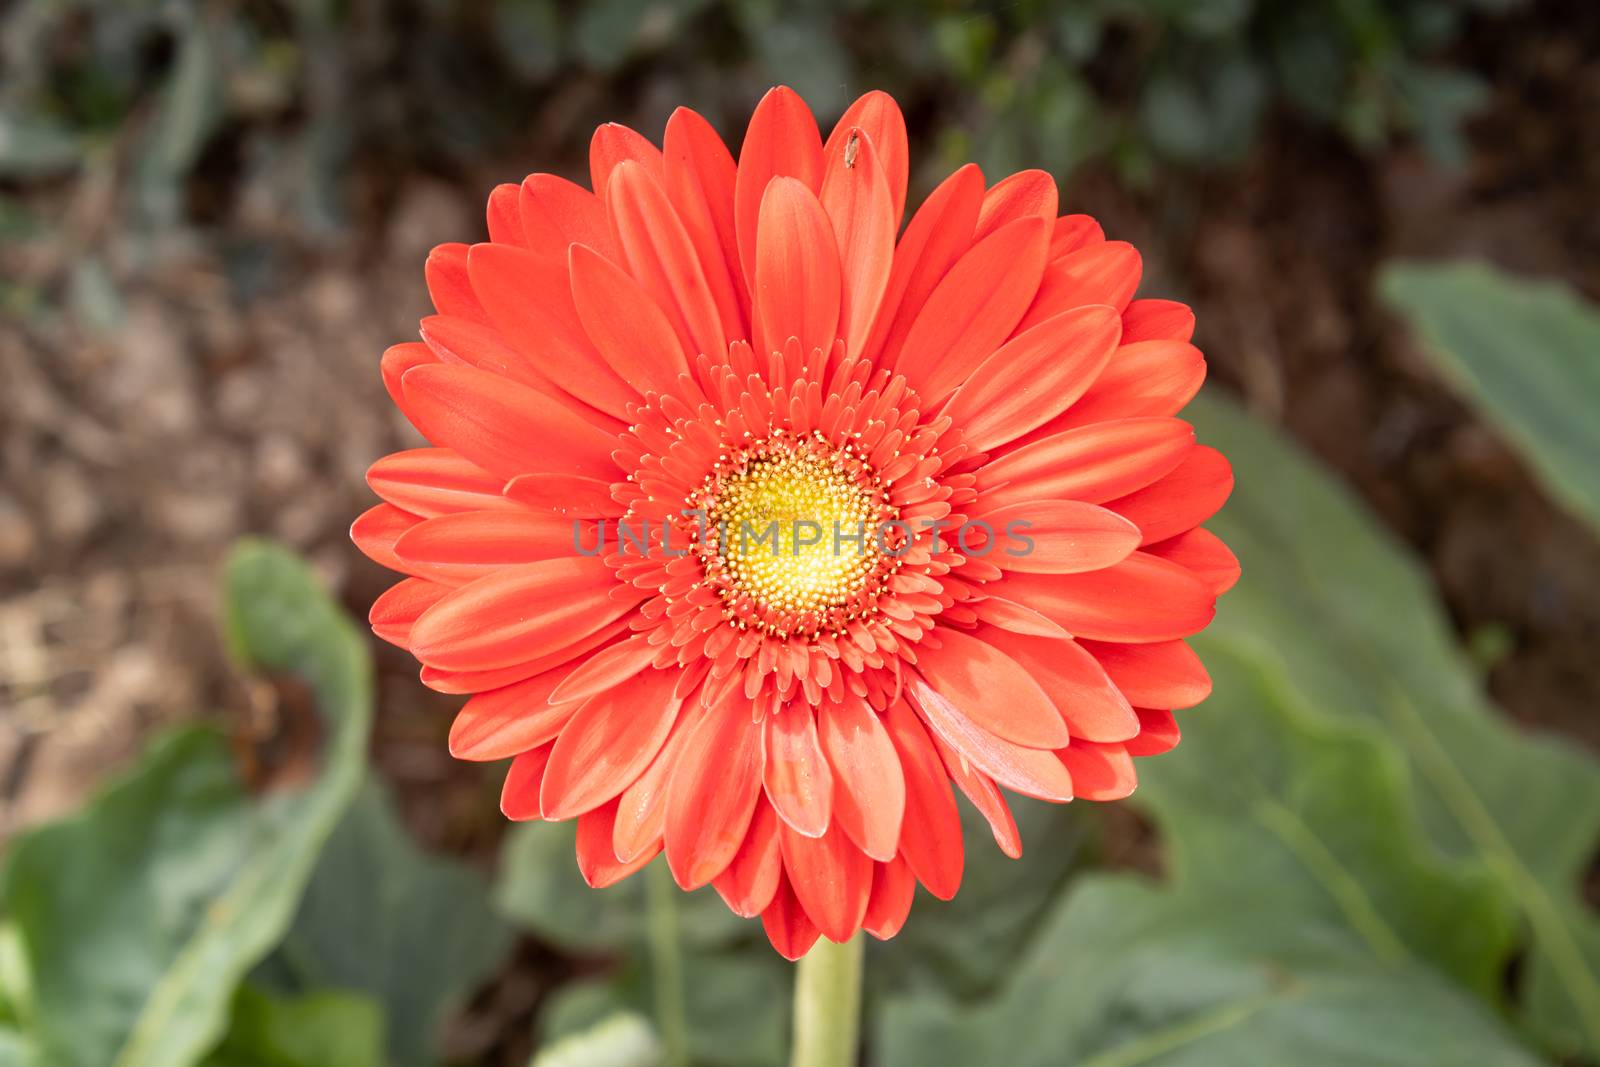 Red Gerbera Daisy or Gerbera Flower in Garden with Natural Light on Green Leaves Background on Center Frame